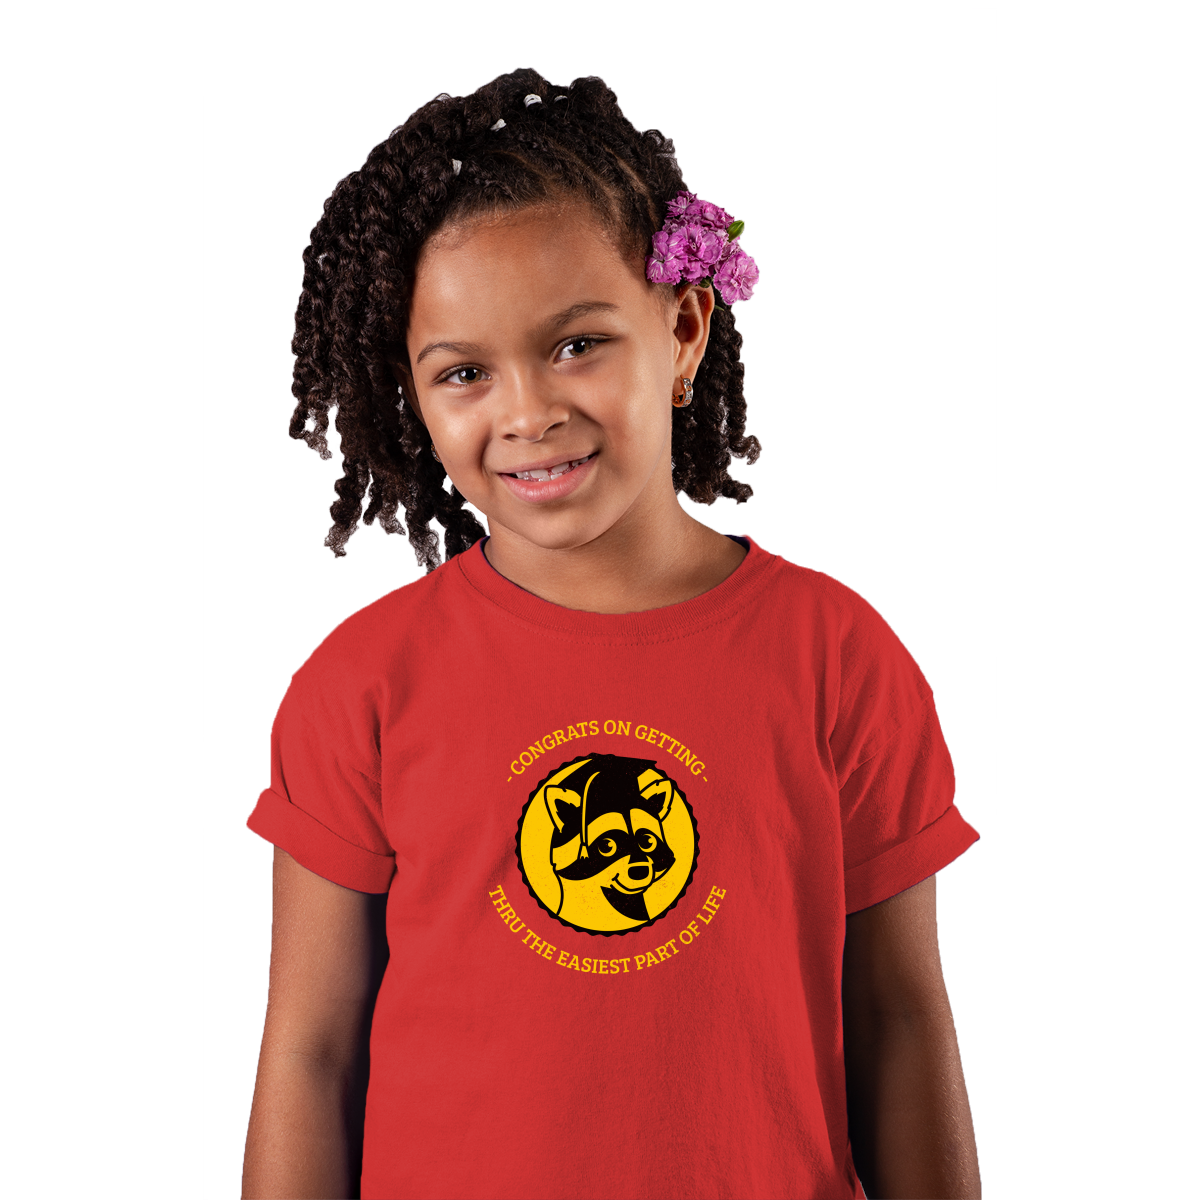 Congrats On Getting Thru The Easiest Part Of Life Kids T-shirt | Red